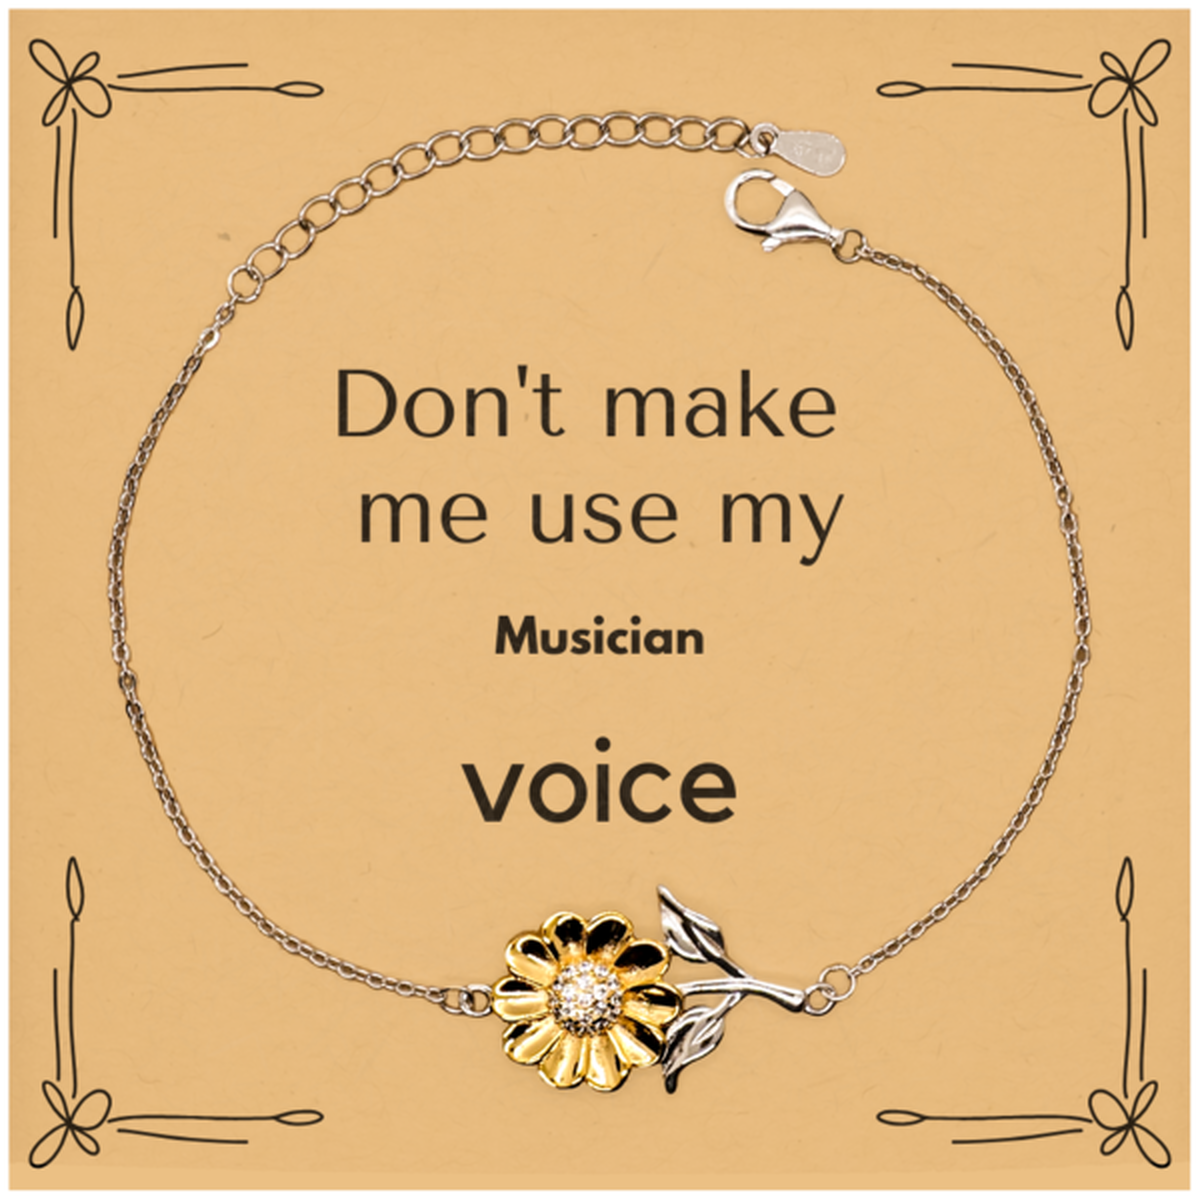 Don't make me use my Musician voice, Sarcasm Musician Card Gifts, Christmas Musician Sunflower Bracelet Birthday Unique Gifts For Musician Coworkers, Men, Women, Colleague, Friends